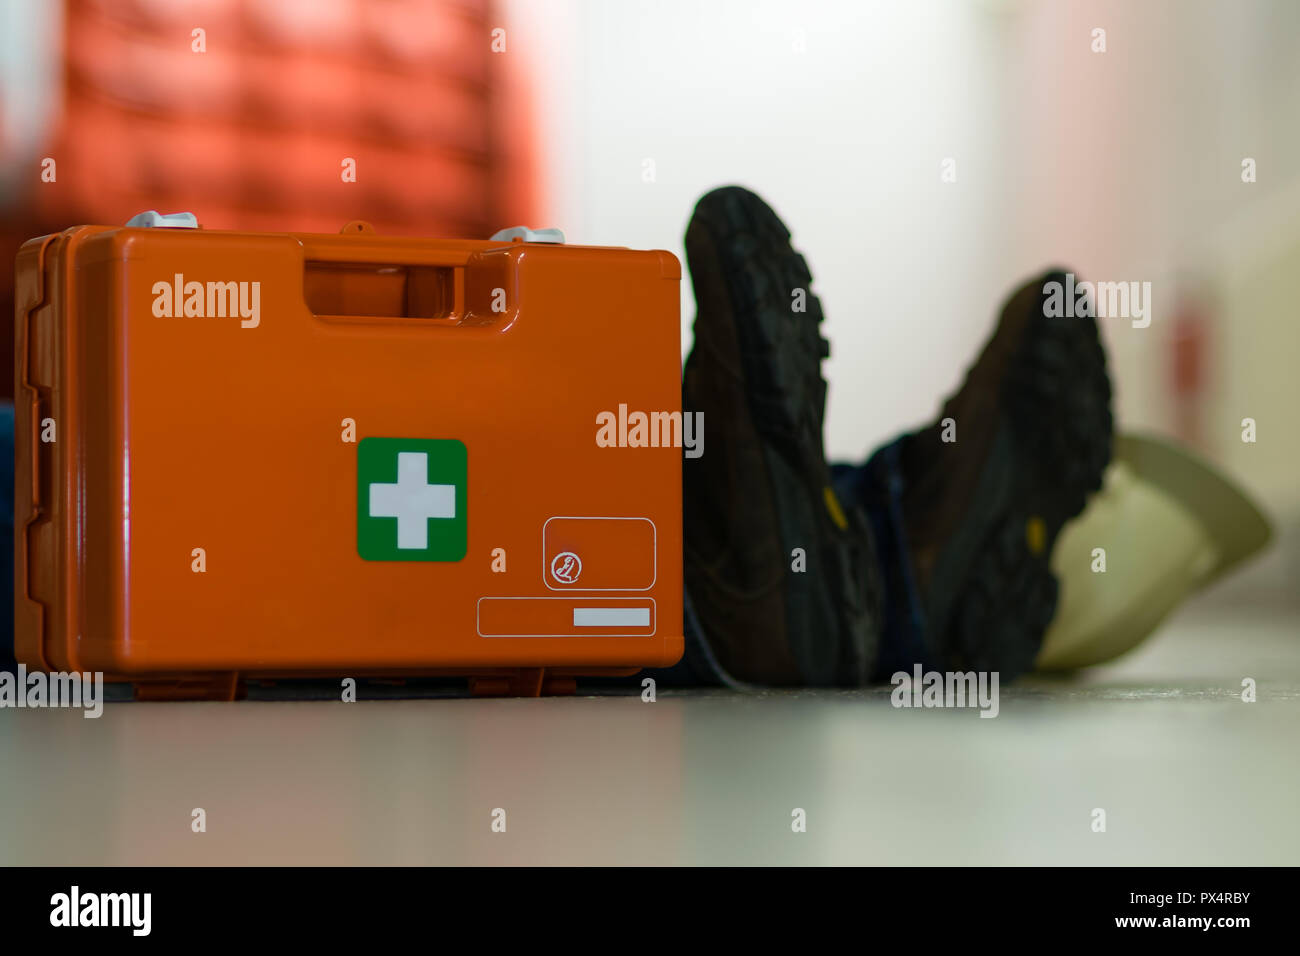 First aid after an accident at work Stock Photo